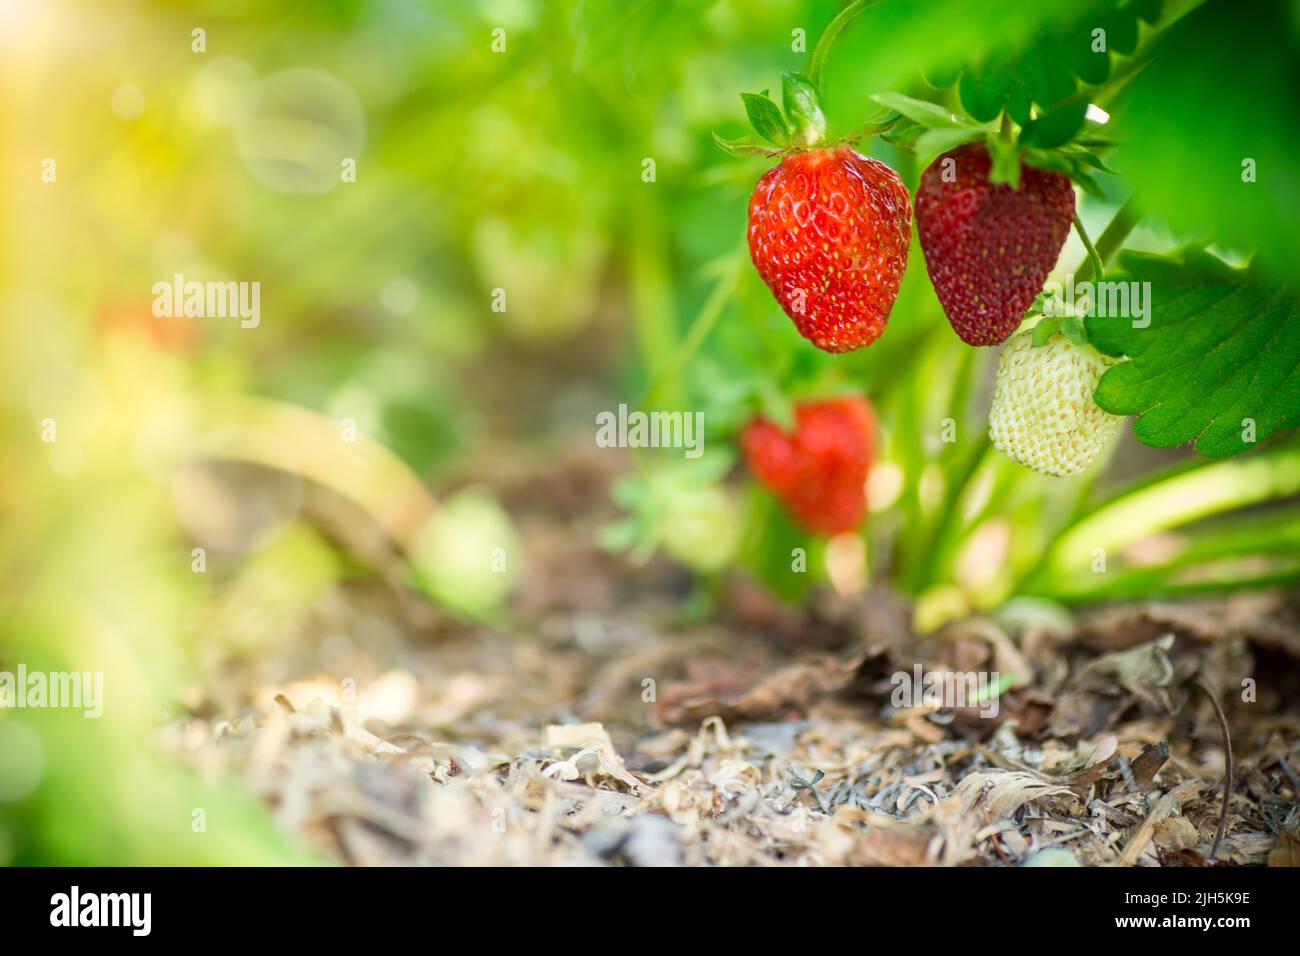 a bush of ripe red strawberries with leaves grows in the sun, outdoors. Stock Photo